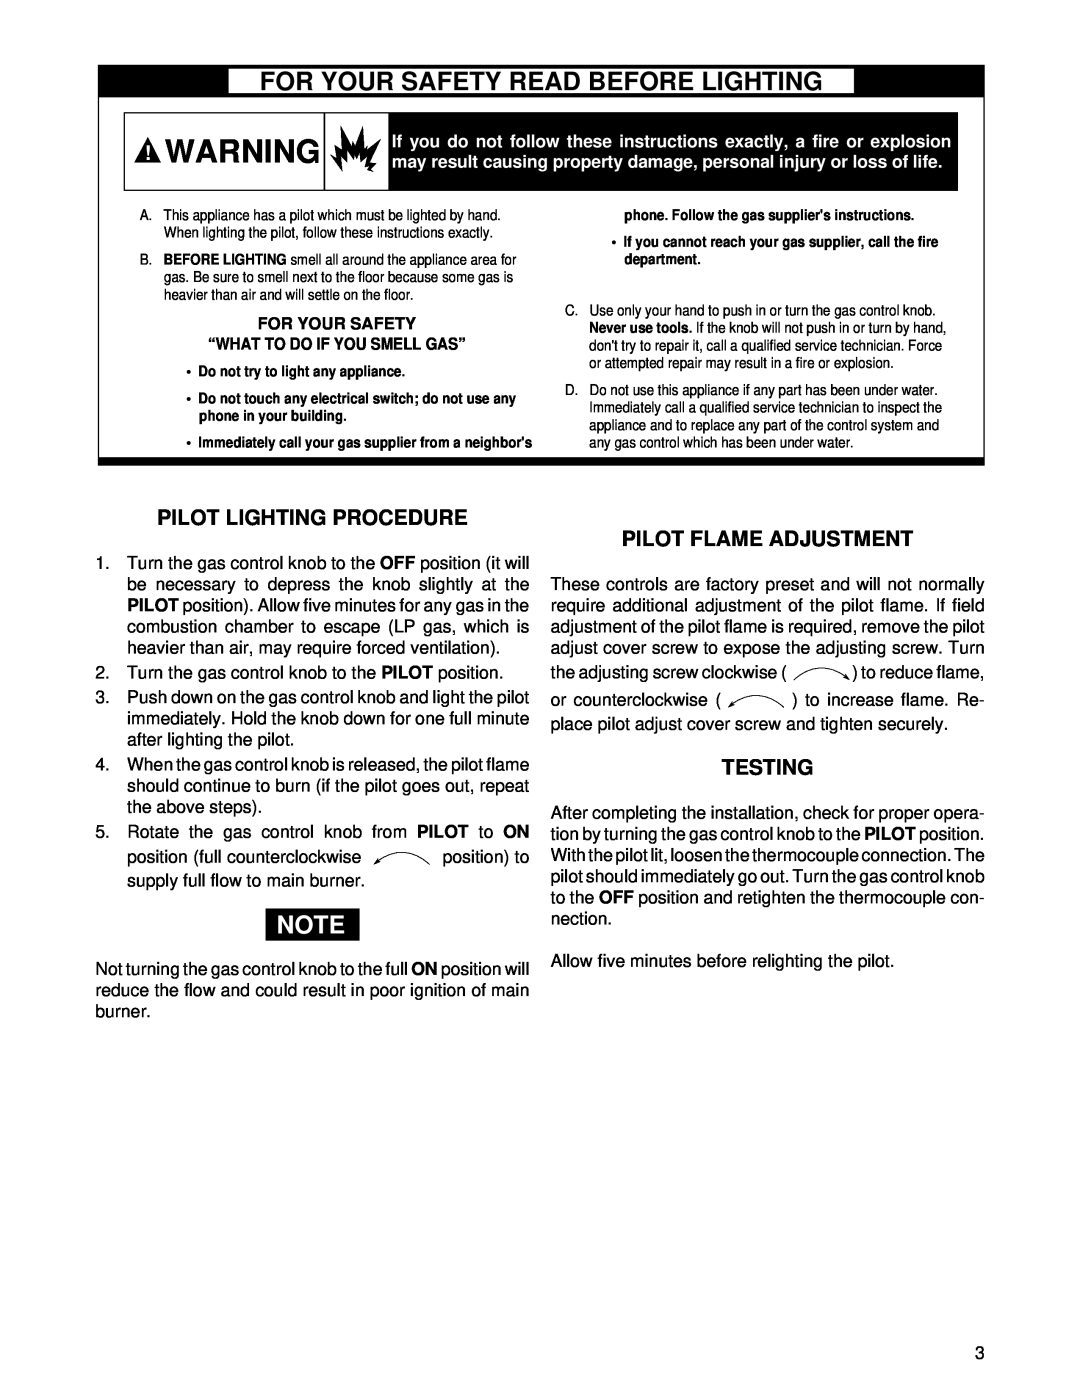 White Rodgers 764-759 For Your Safety Read Before Lighting, Pilot Lighting Procedure, Pilot Flame Adjustment, Testing 